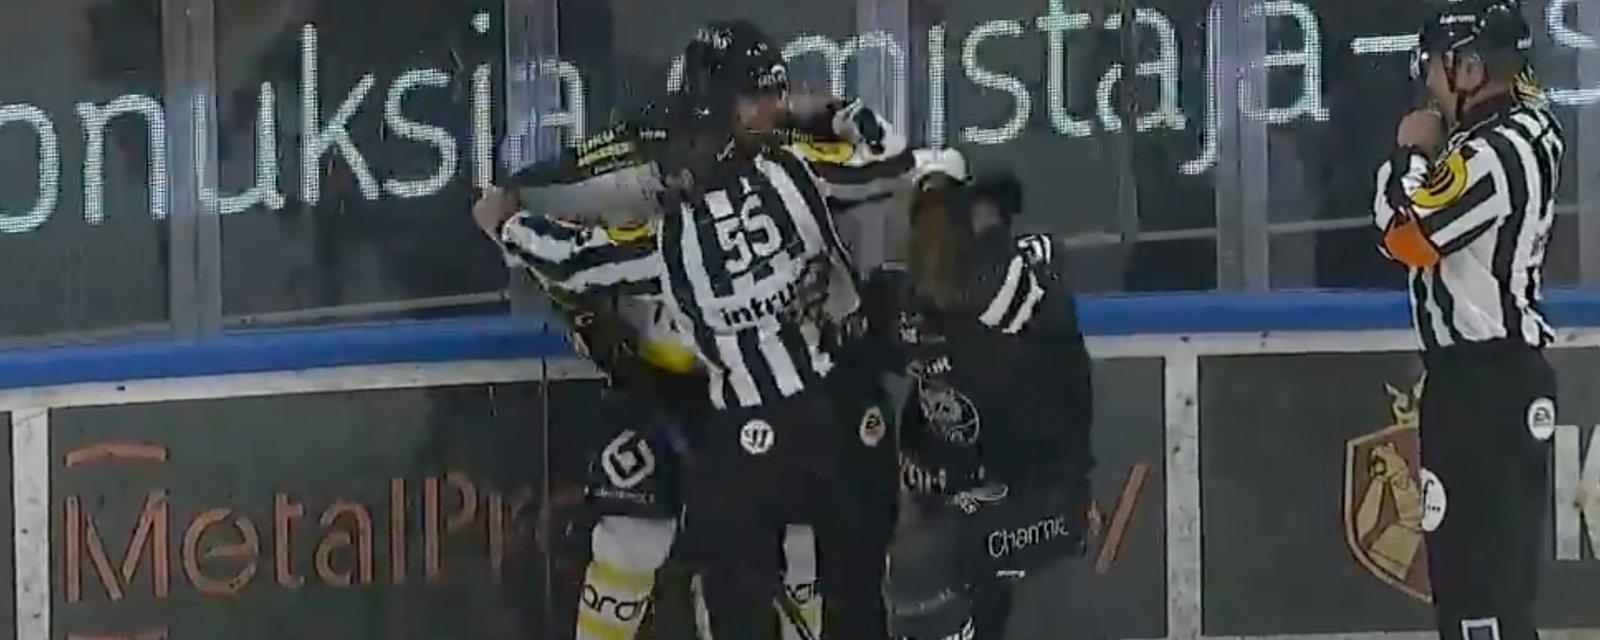 Lengthy suspension for Nick Ritchie following vicious attack!